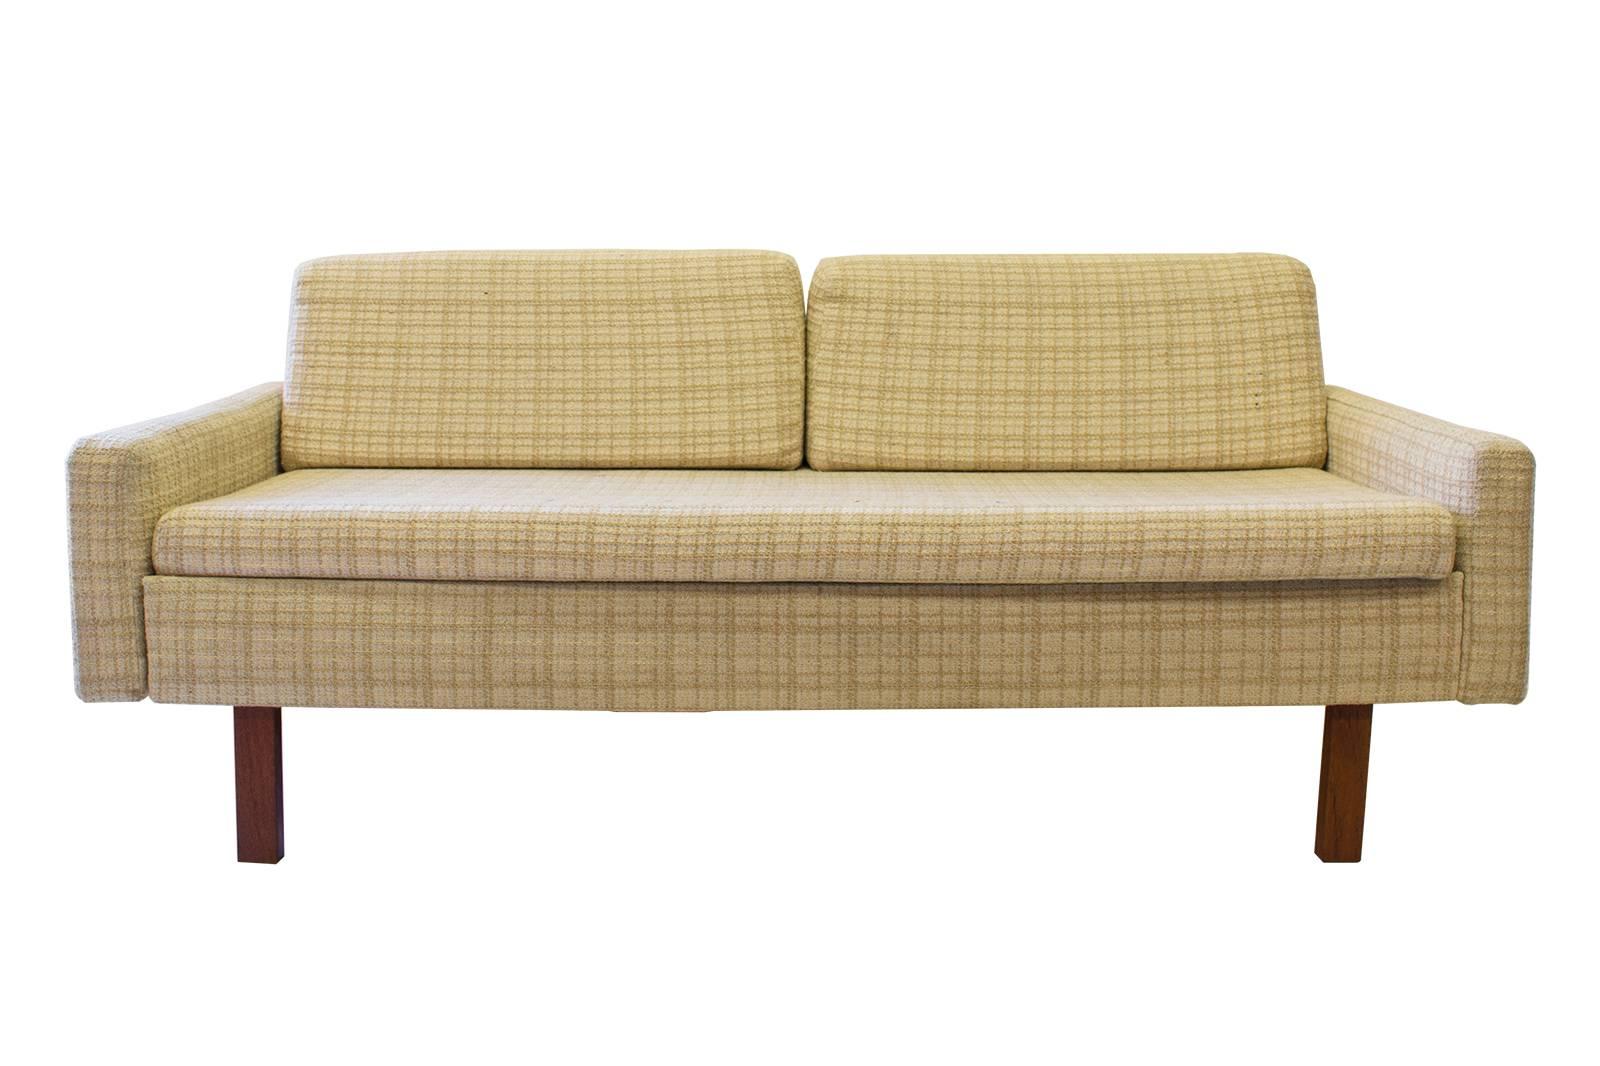 This small Mid-Century sofa has an hidden pull-out side table in teak. The piece has one large seat cushion and two wedge-shaped back cushions.
The side table open the width is 78".